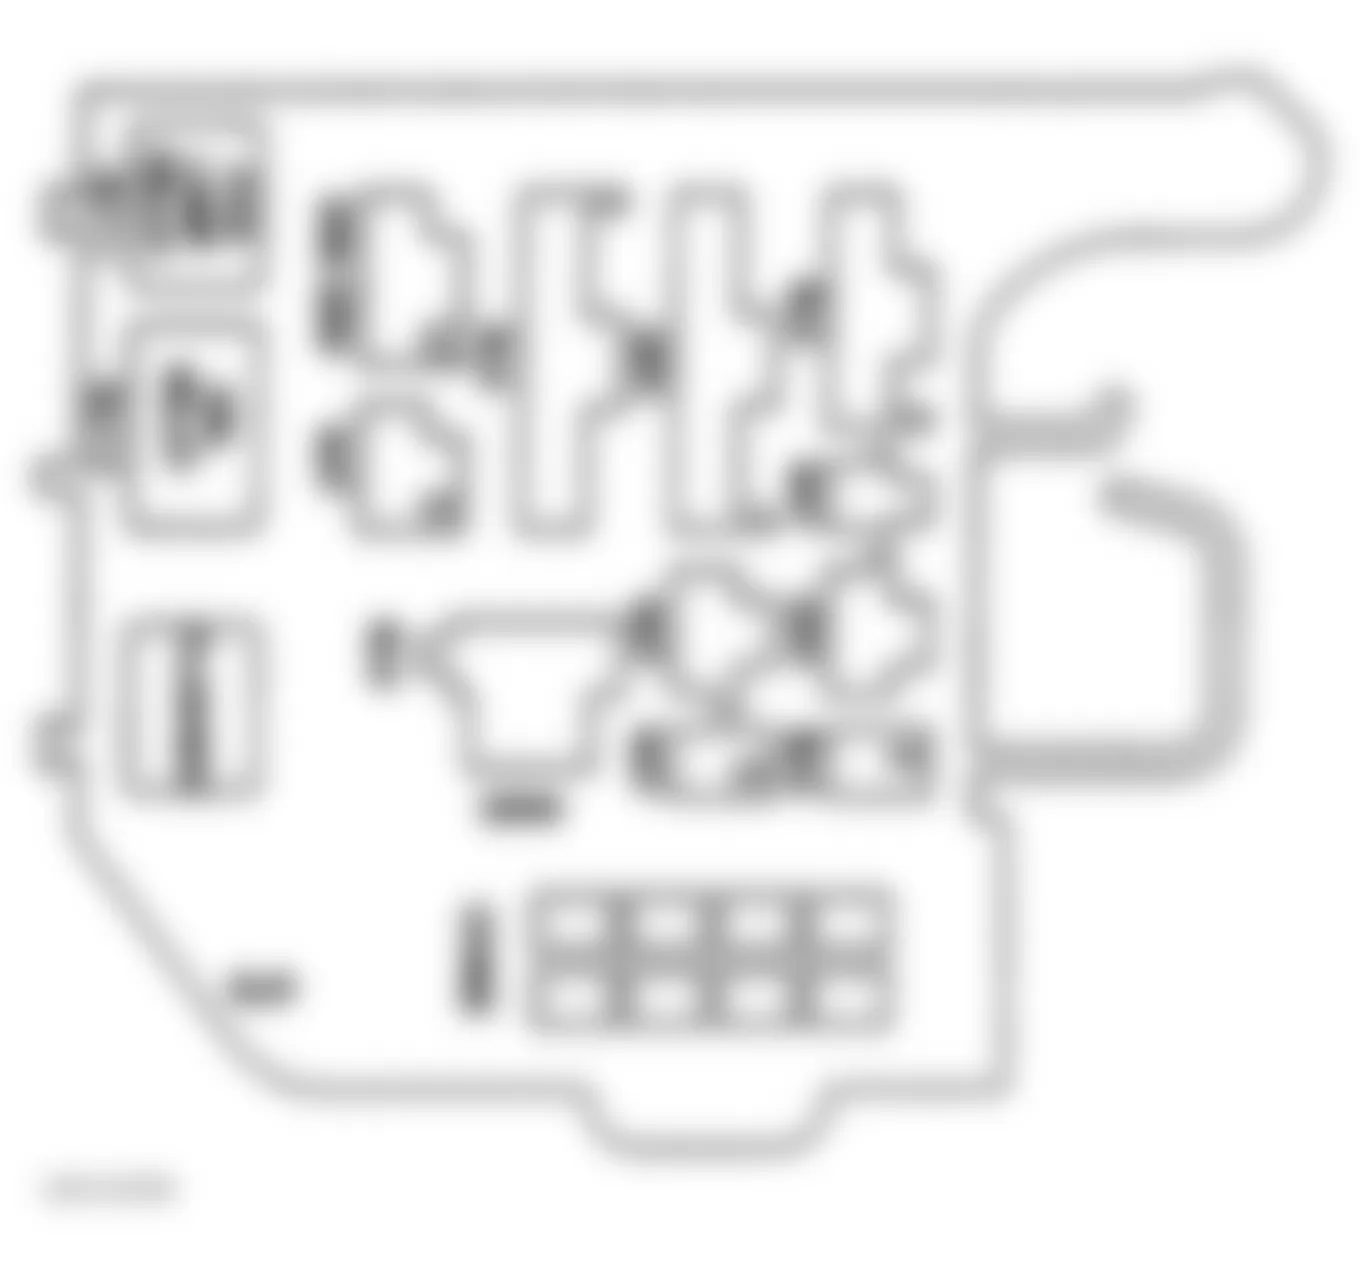 GMC Pickup K1500 1997 - Component Locations -  Identifying Convenience Center Components